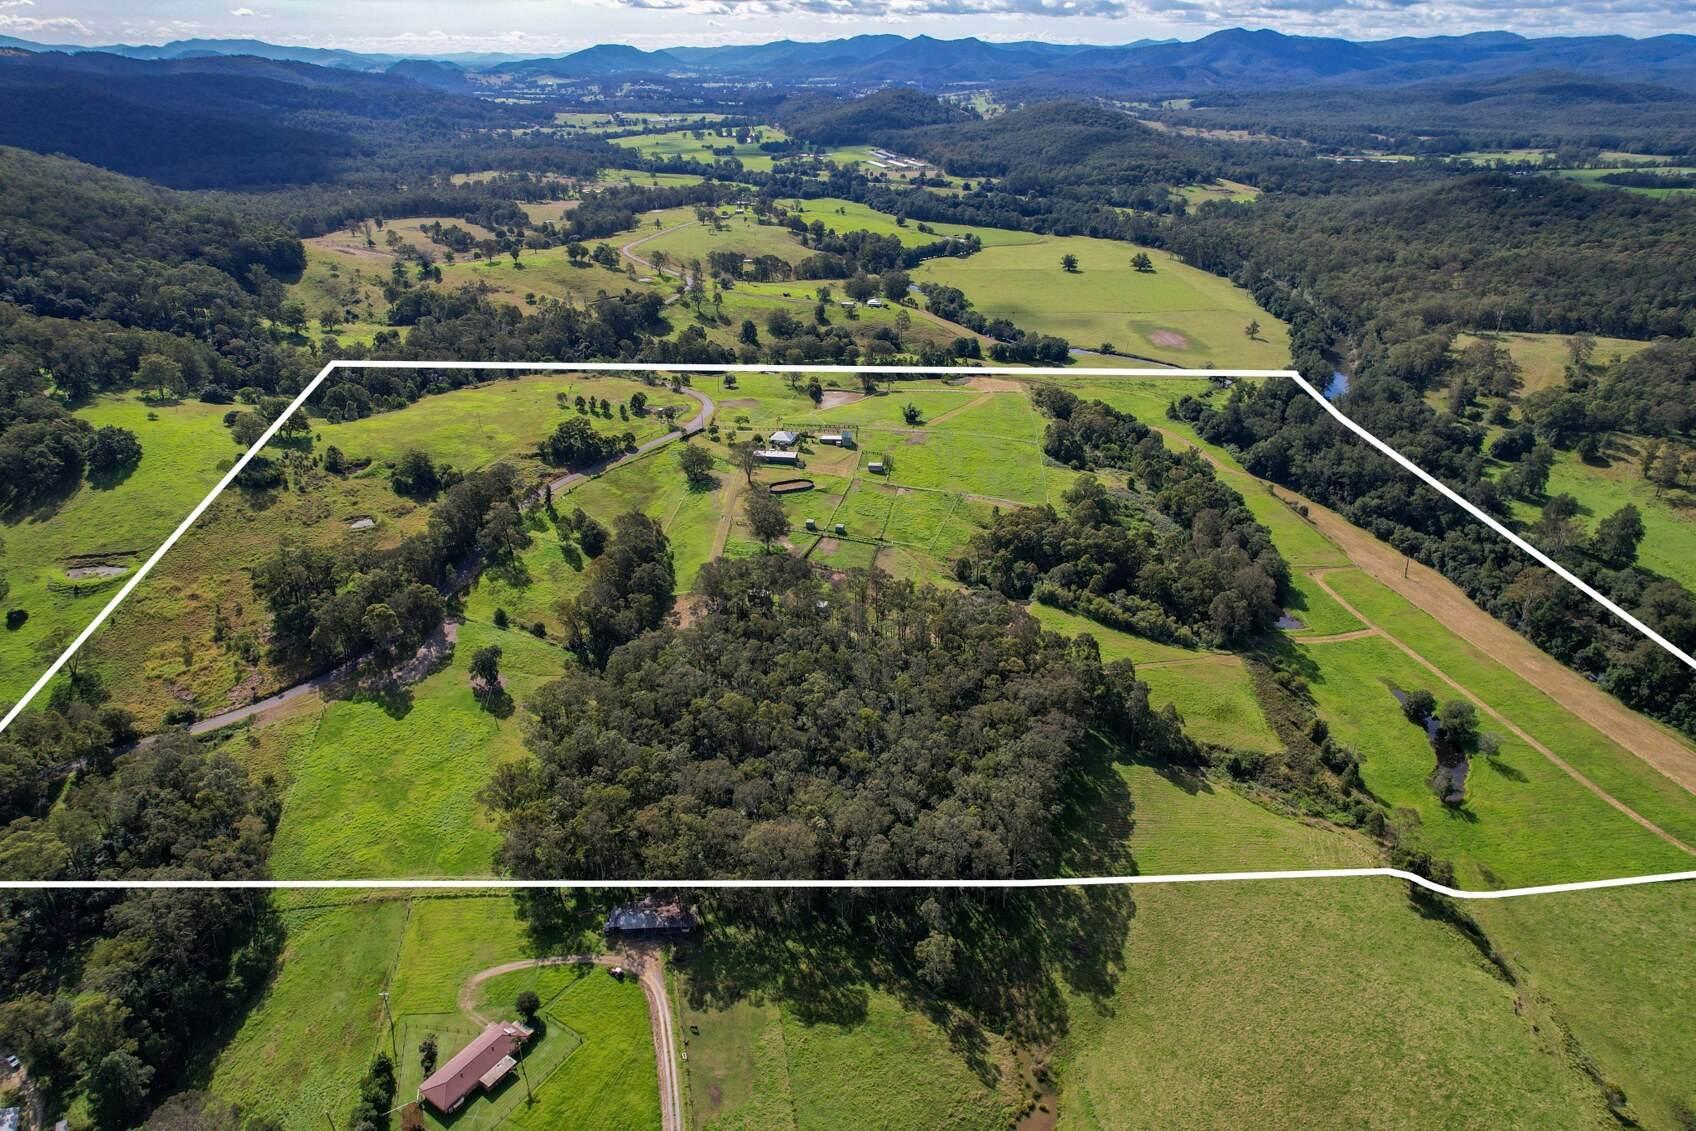 Rural Property For Sale Mid North Coast NSW